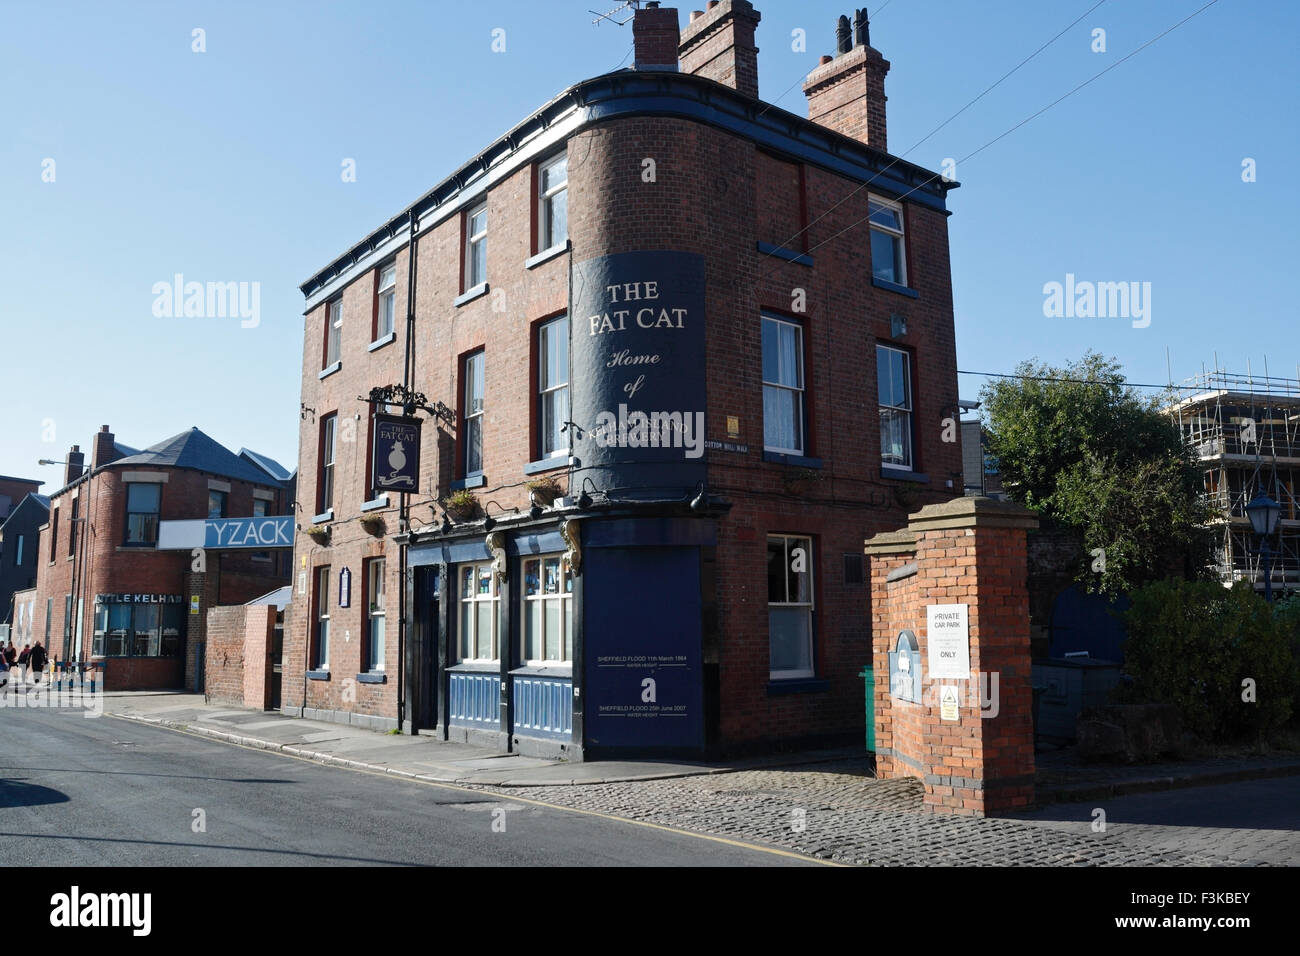 The Fat Cat Public House in Shalesmoor Kelham Island Sheffield England UK Traditional victorian pub inner city urban grade II listed building Stock Photo